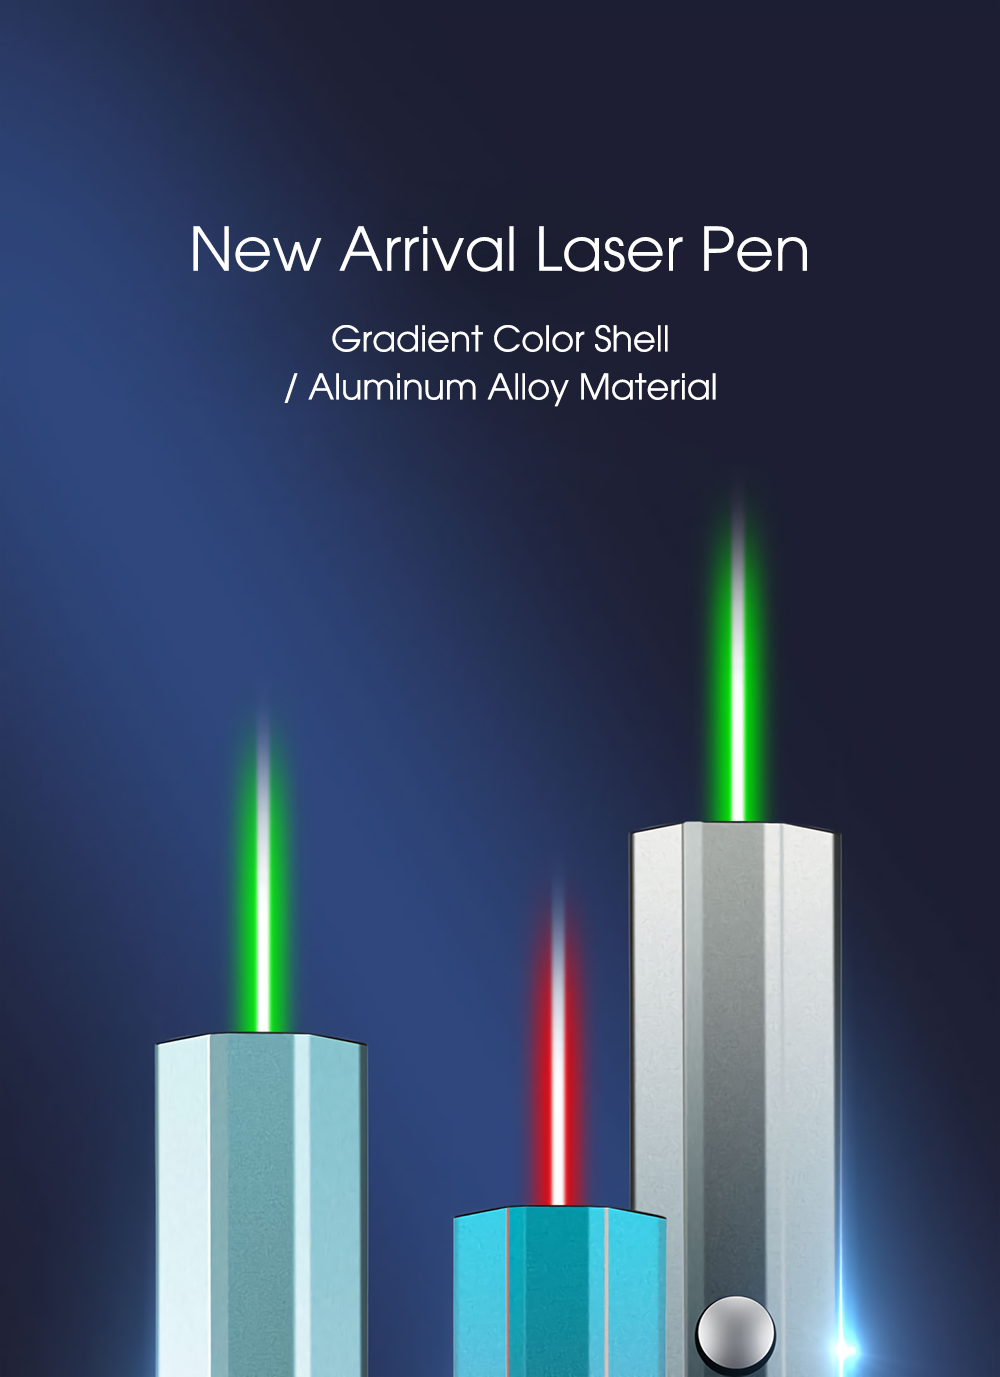 Green-Light-Laser-Pointer-Pen-532nm-USB-Chargeable-Portable-Highlight-PPT-Laser-Pointer-with-Practic-1893473-1